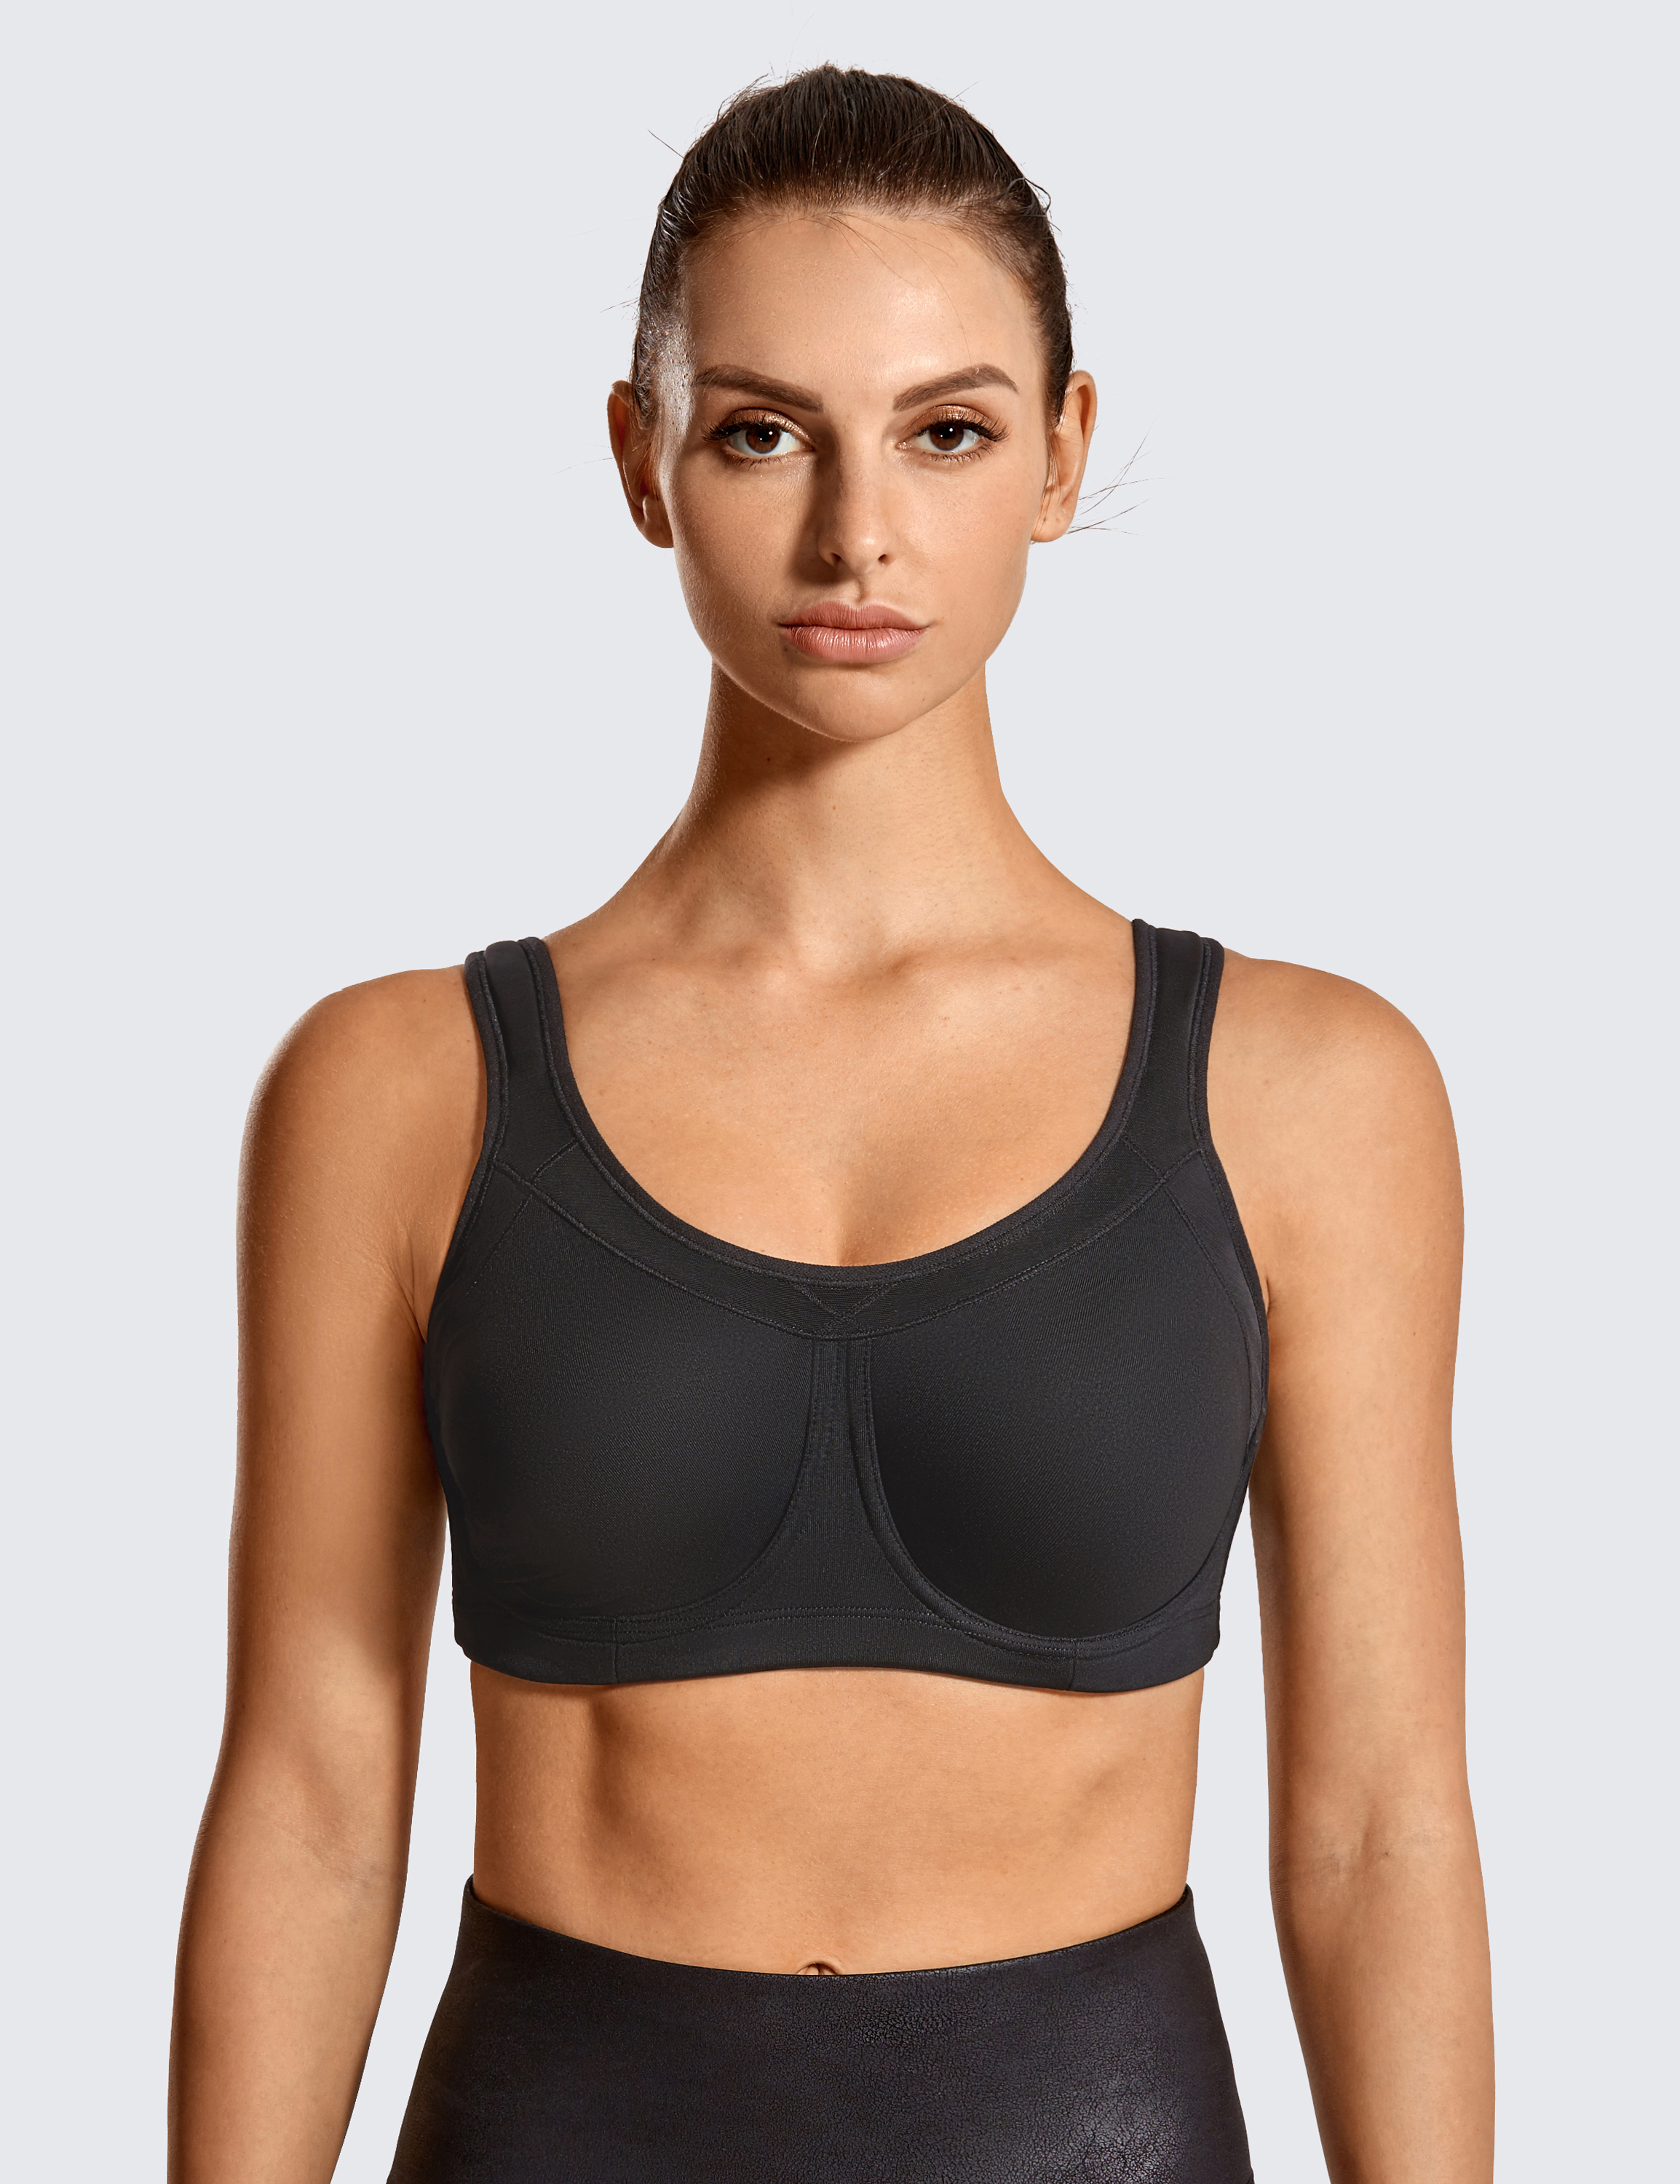 SYROKAN High Impact Sports Bras for Women Underwire Racerback No Bounce  - Stunning Motivation